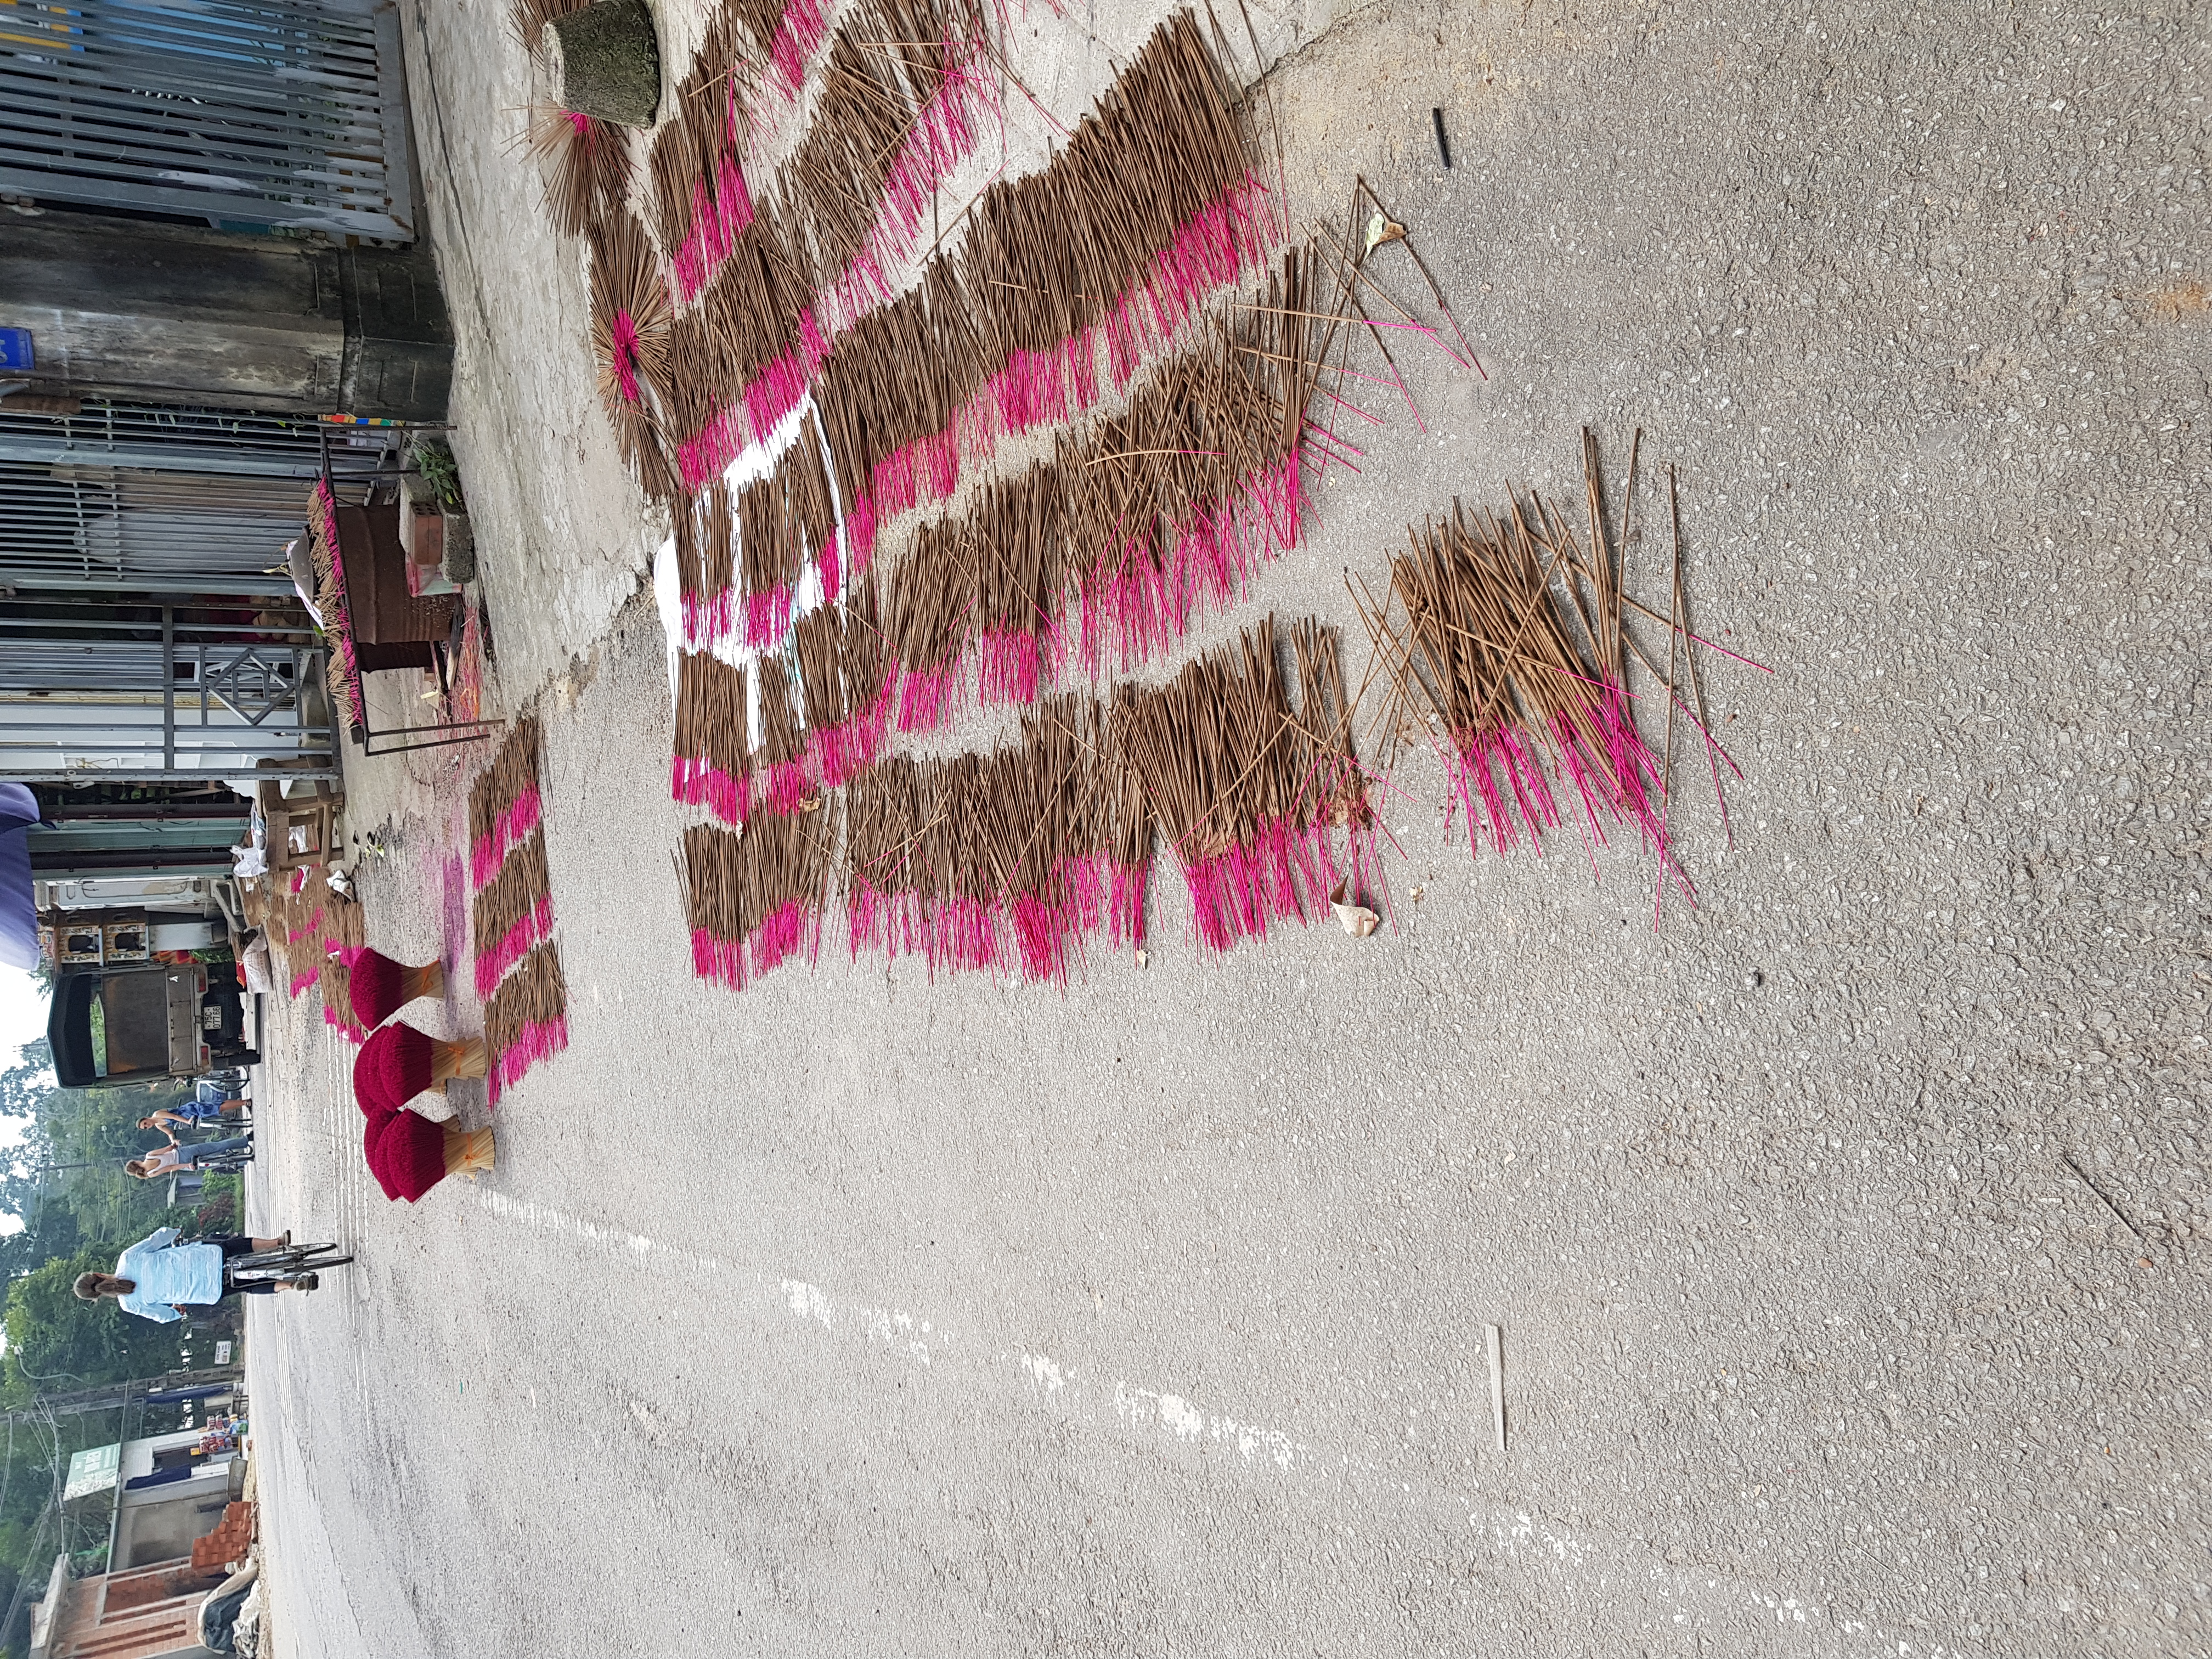 Vietnam - Incense on the road